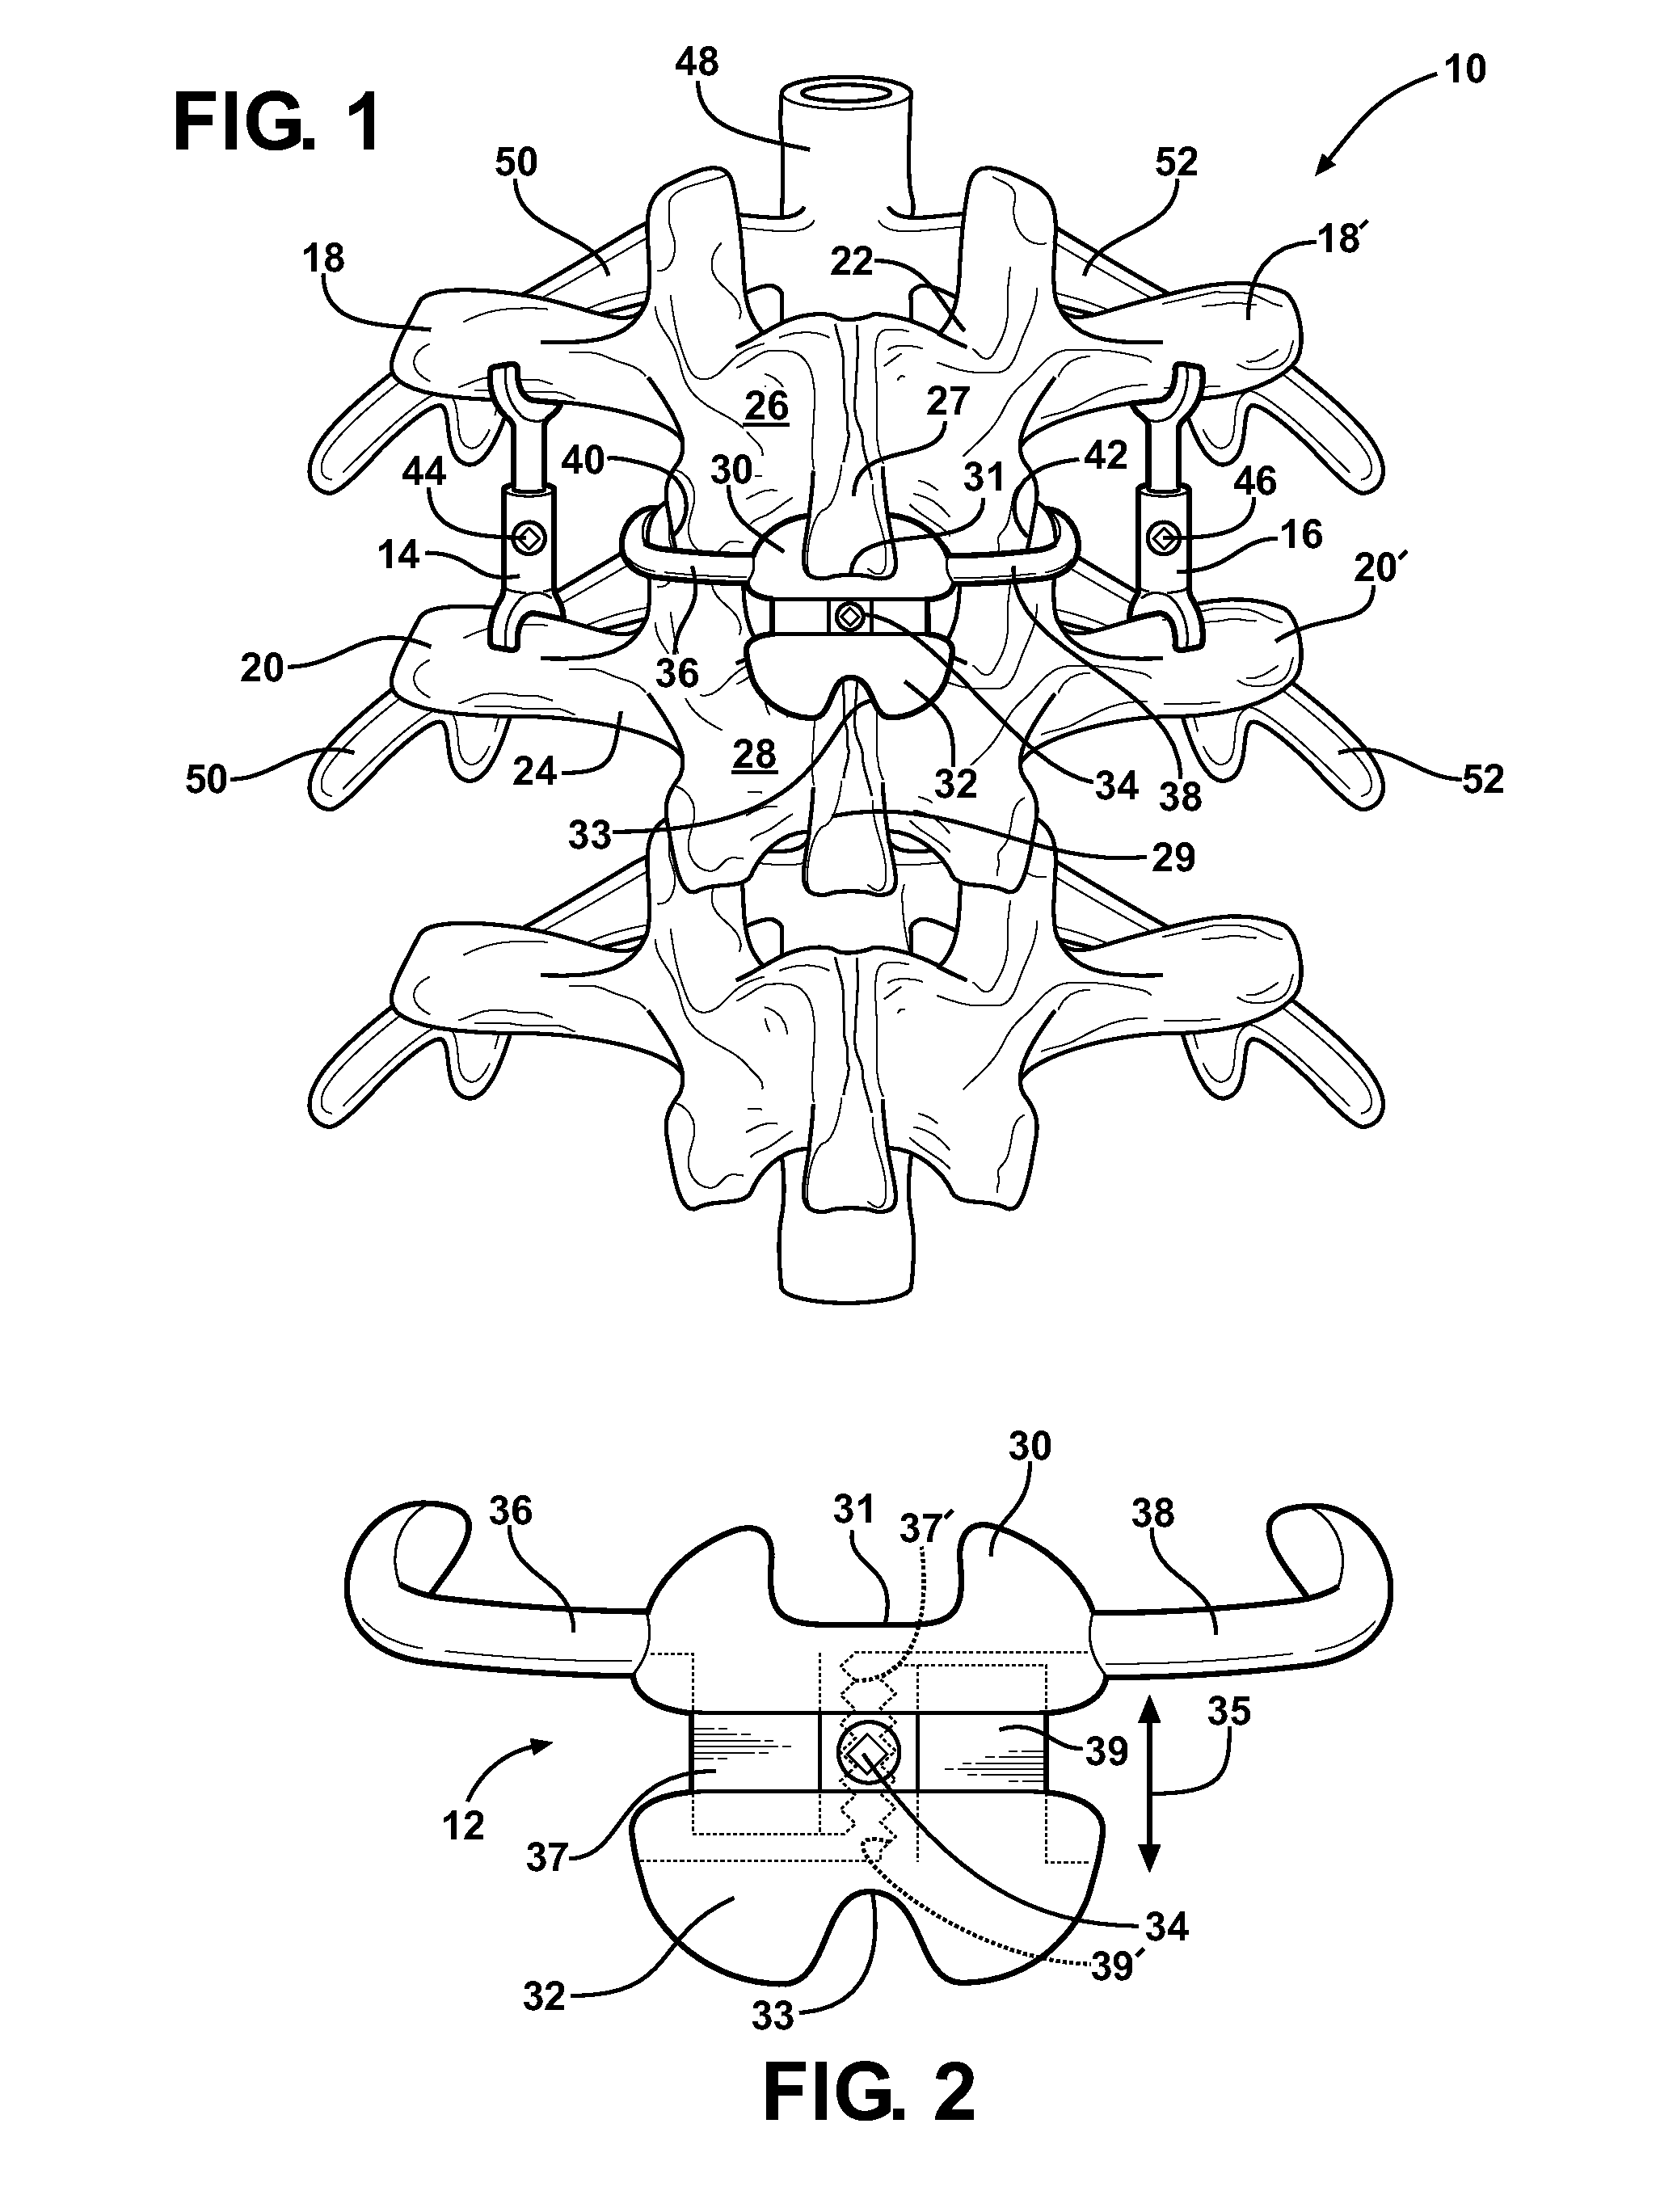 Support insert associated with spinal vertebrae